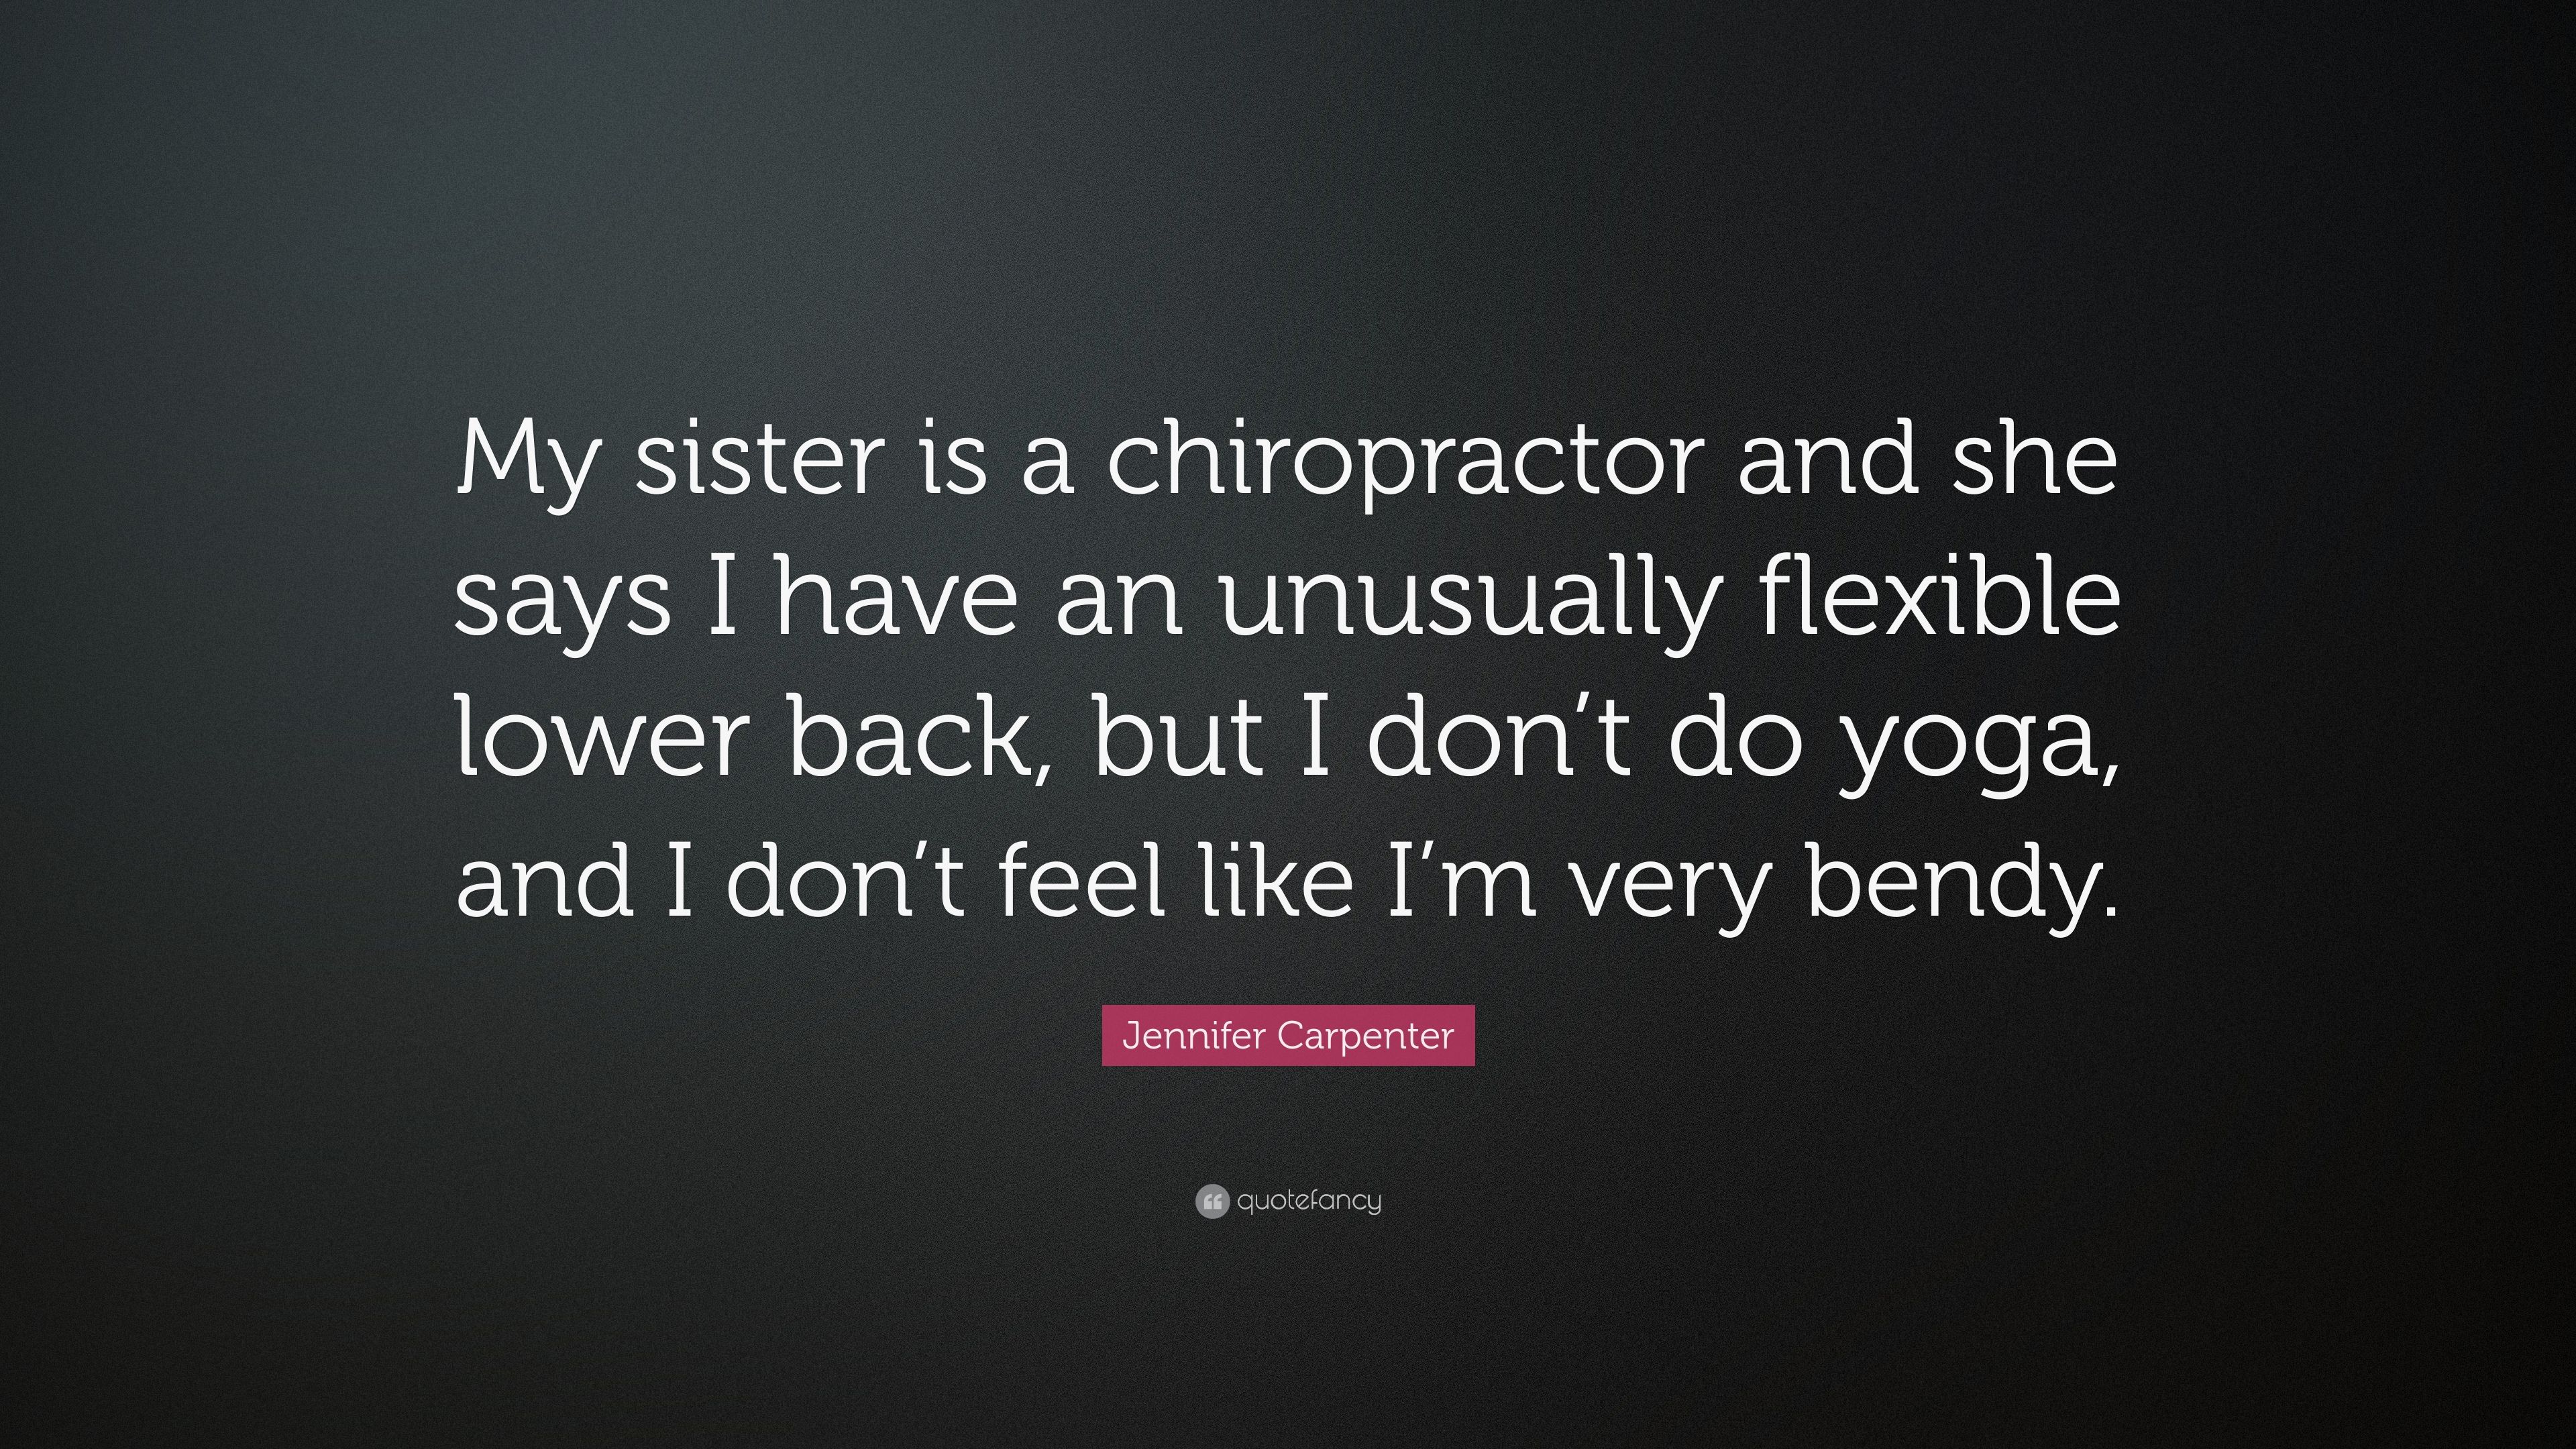 Jennifer Carpenter Quote: “My sister is a chiropractor